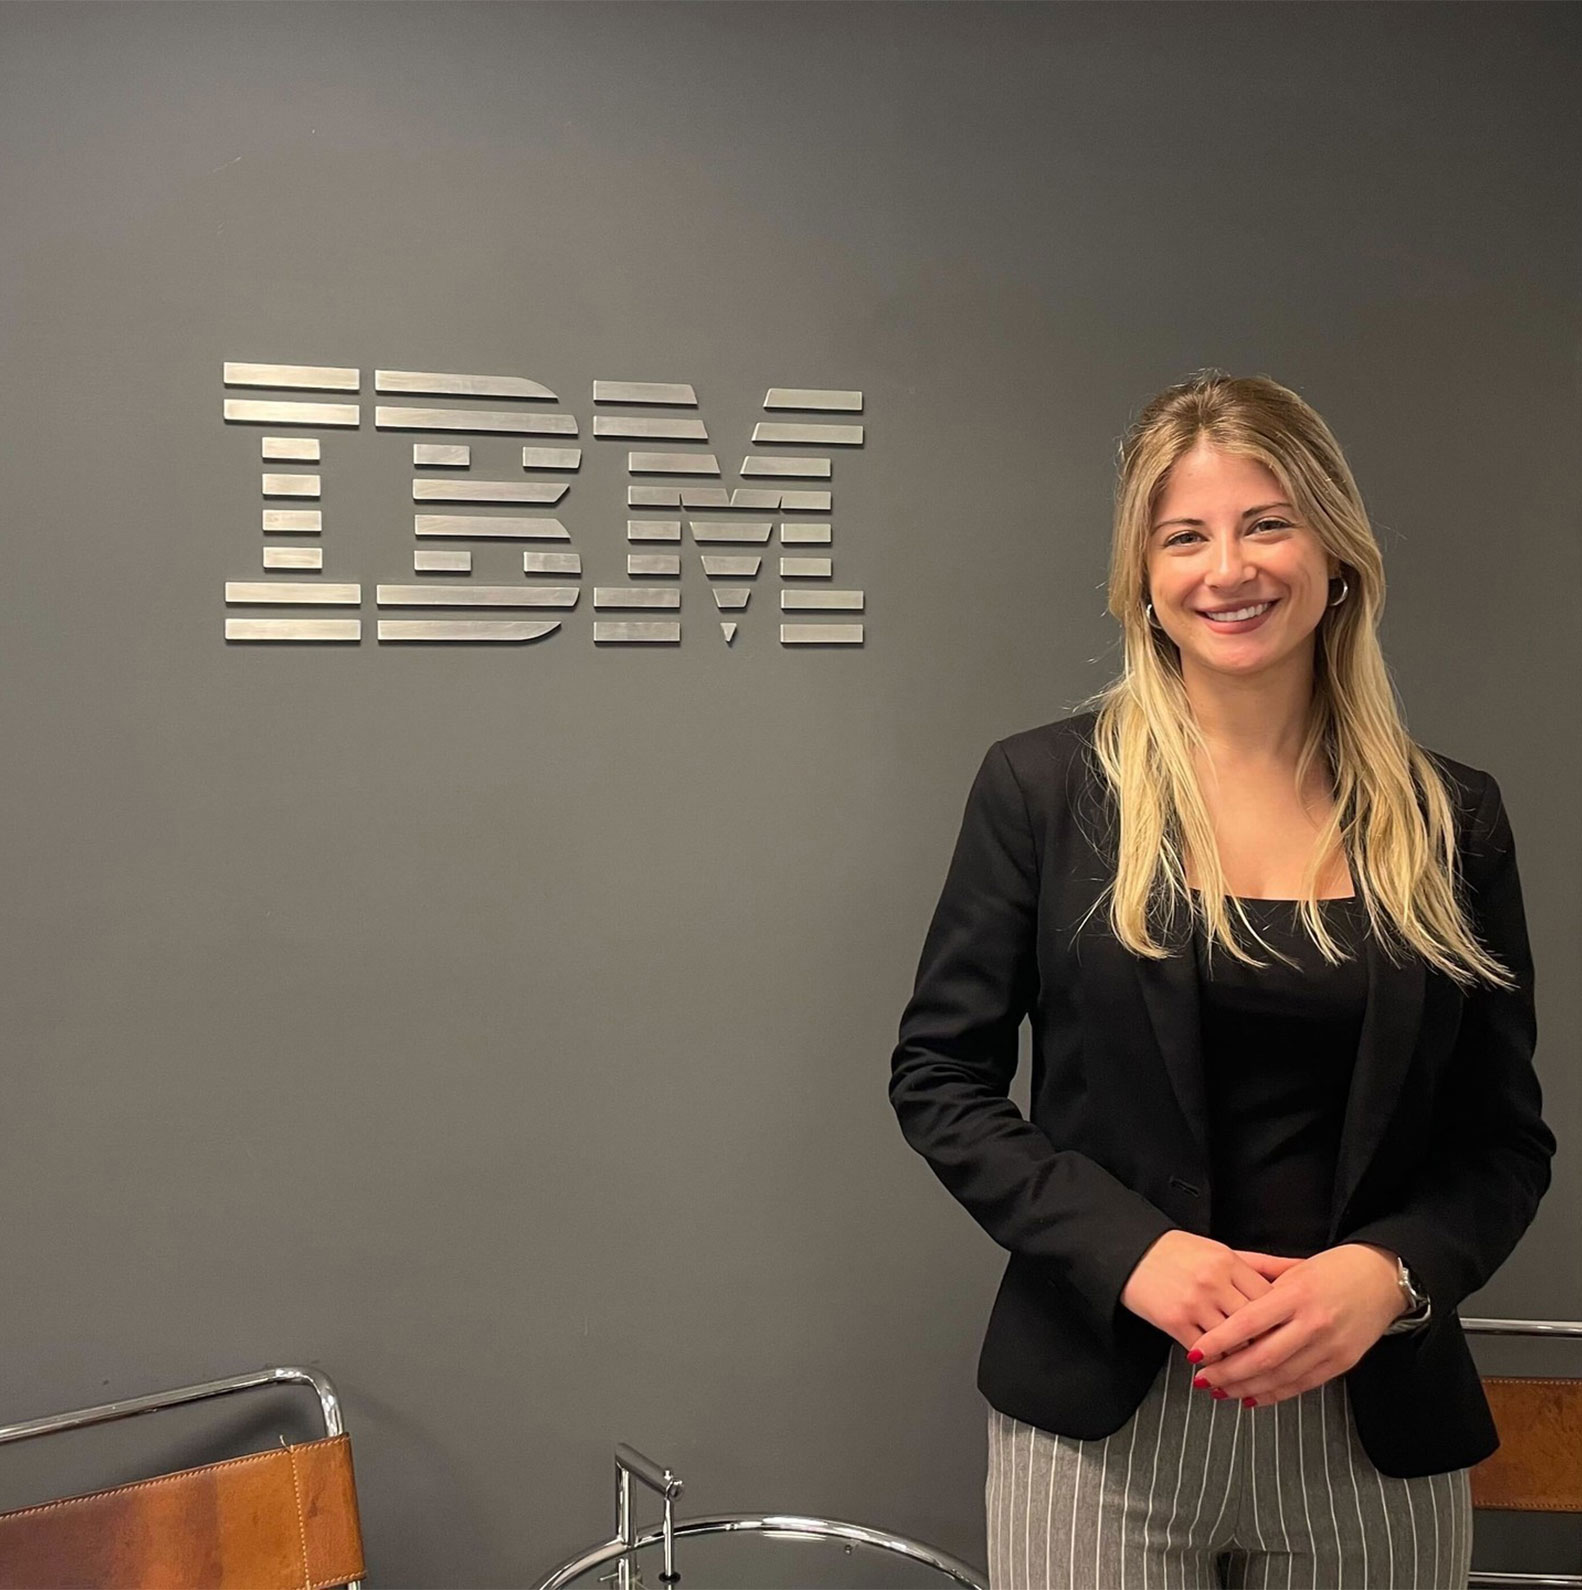 Woman standing, IBM sign behind